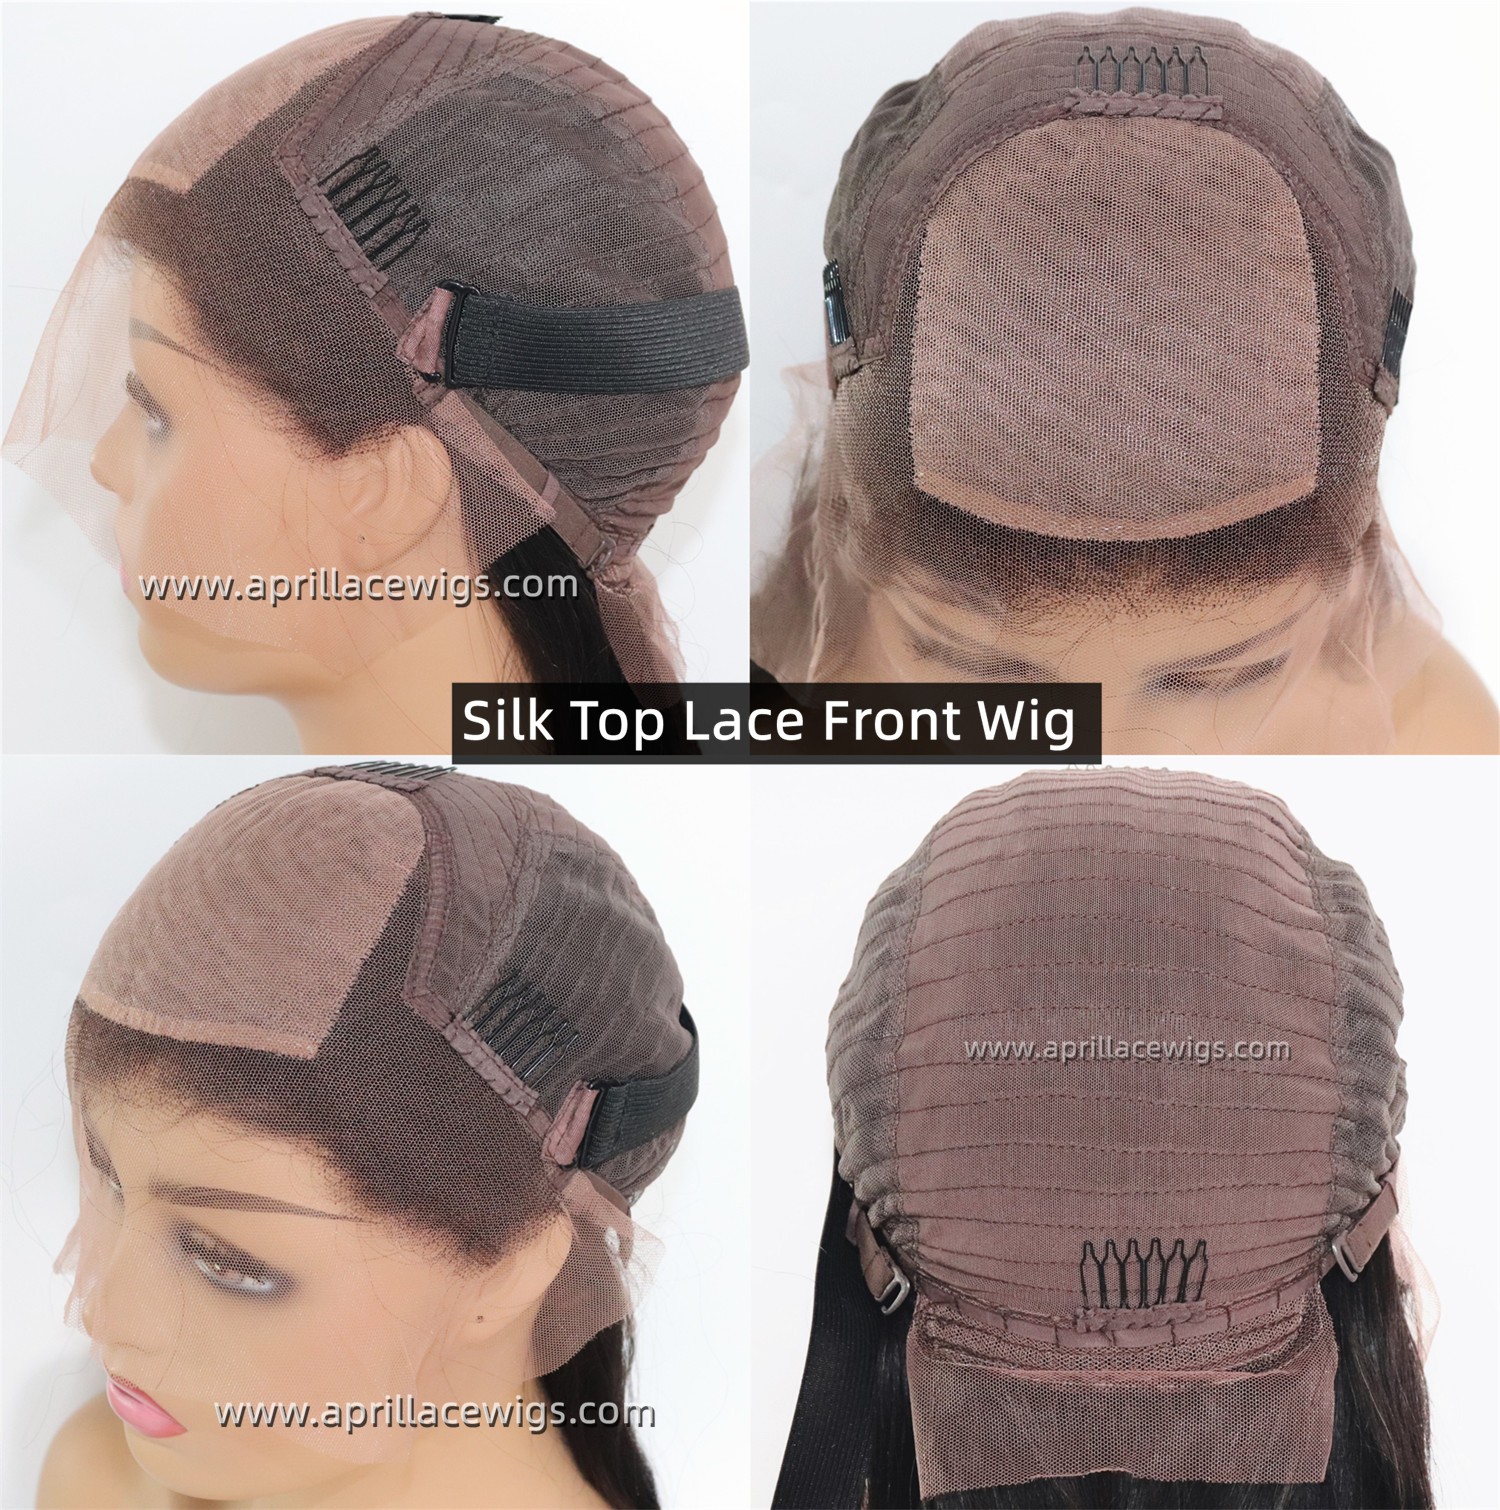 lace front cap, silk top lace front wig